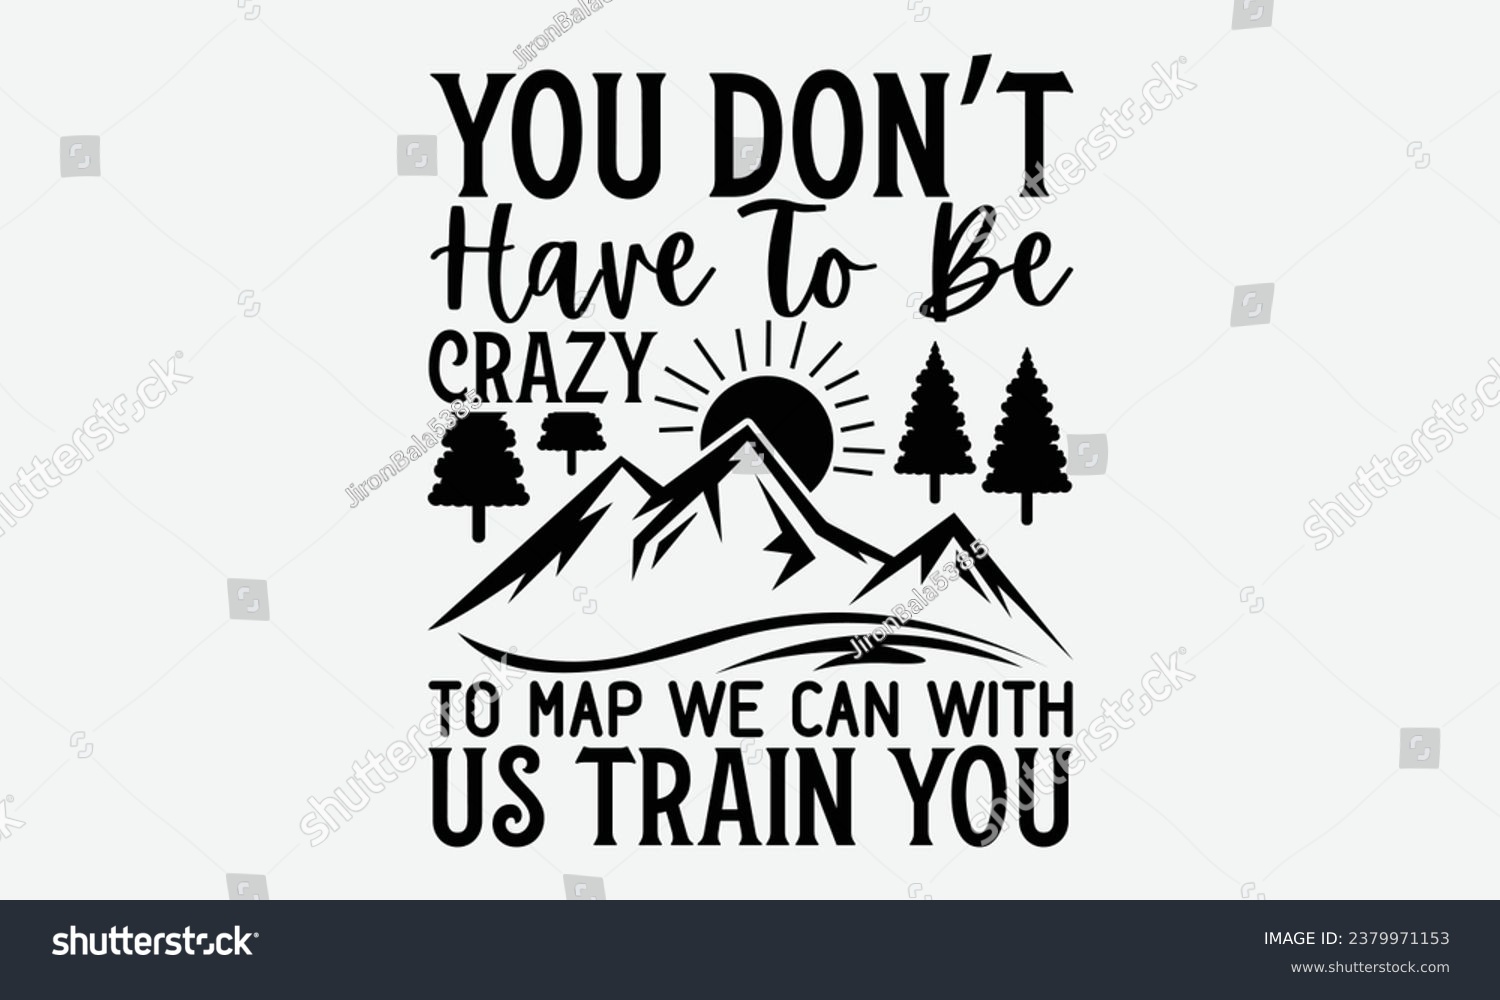 SVG of You Don’t Have To Be Crazy To Map We Can With Us Train You - Camping    t shirt Design, Calligraphy graphic design, Illustration for prints on t-shirts, bags, posters, cards and Mug.
 svg